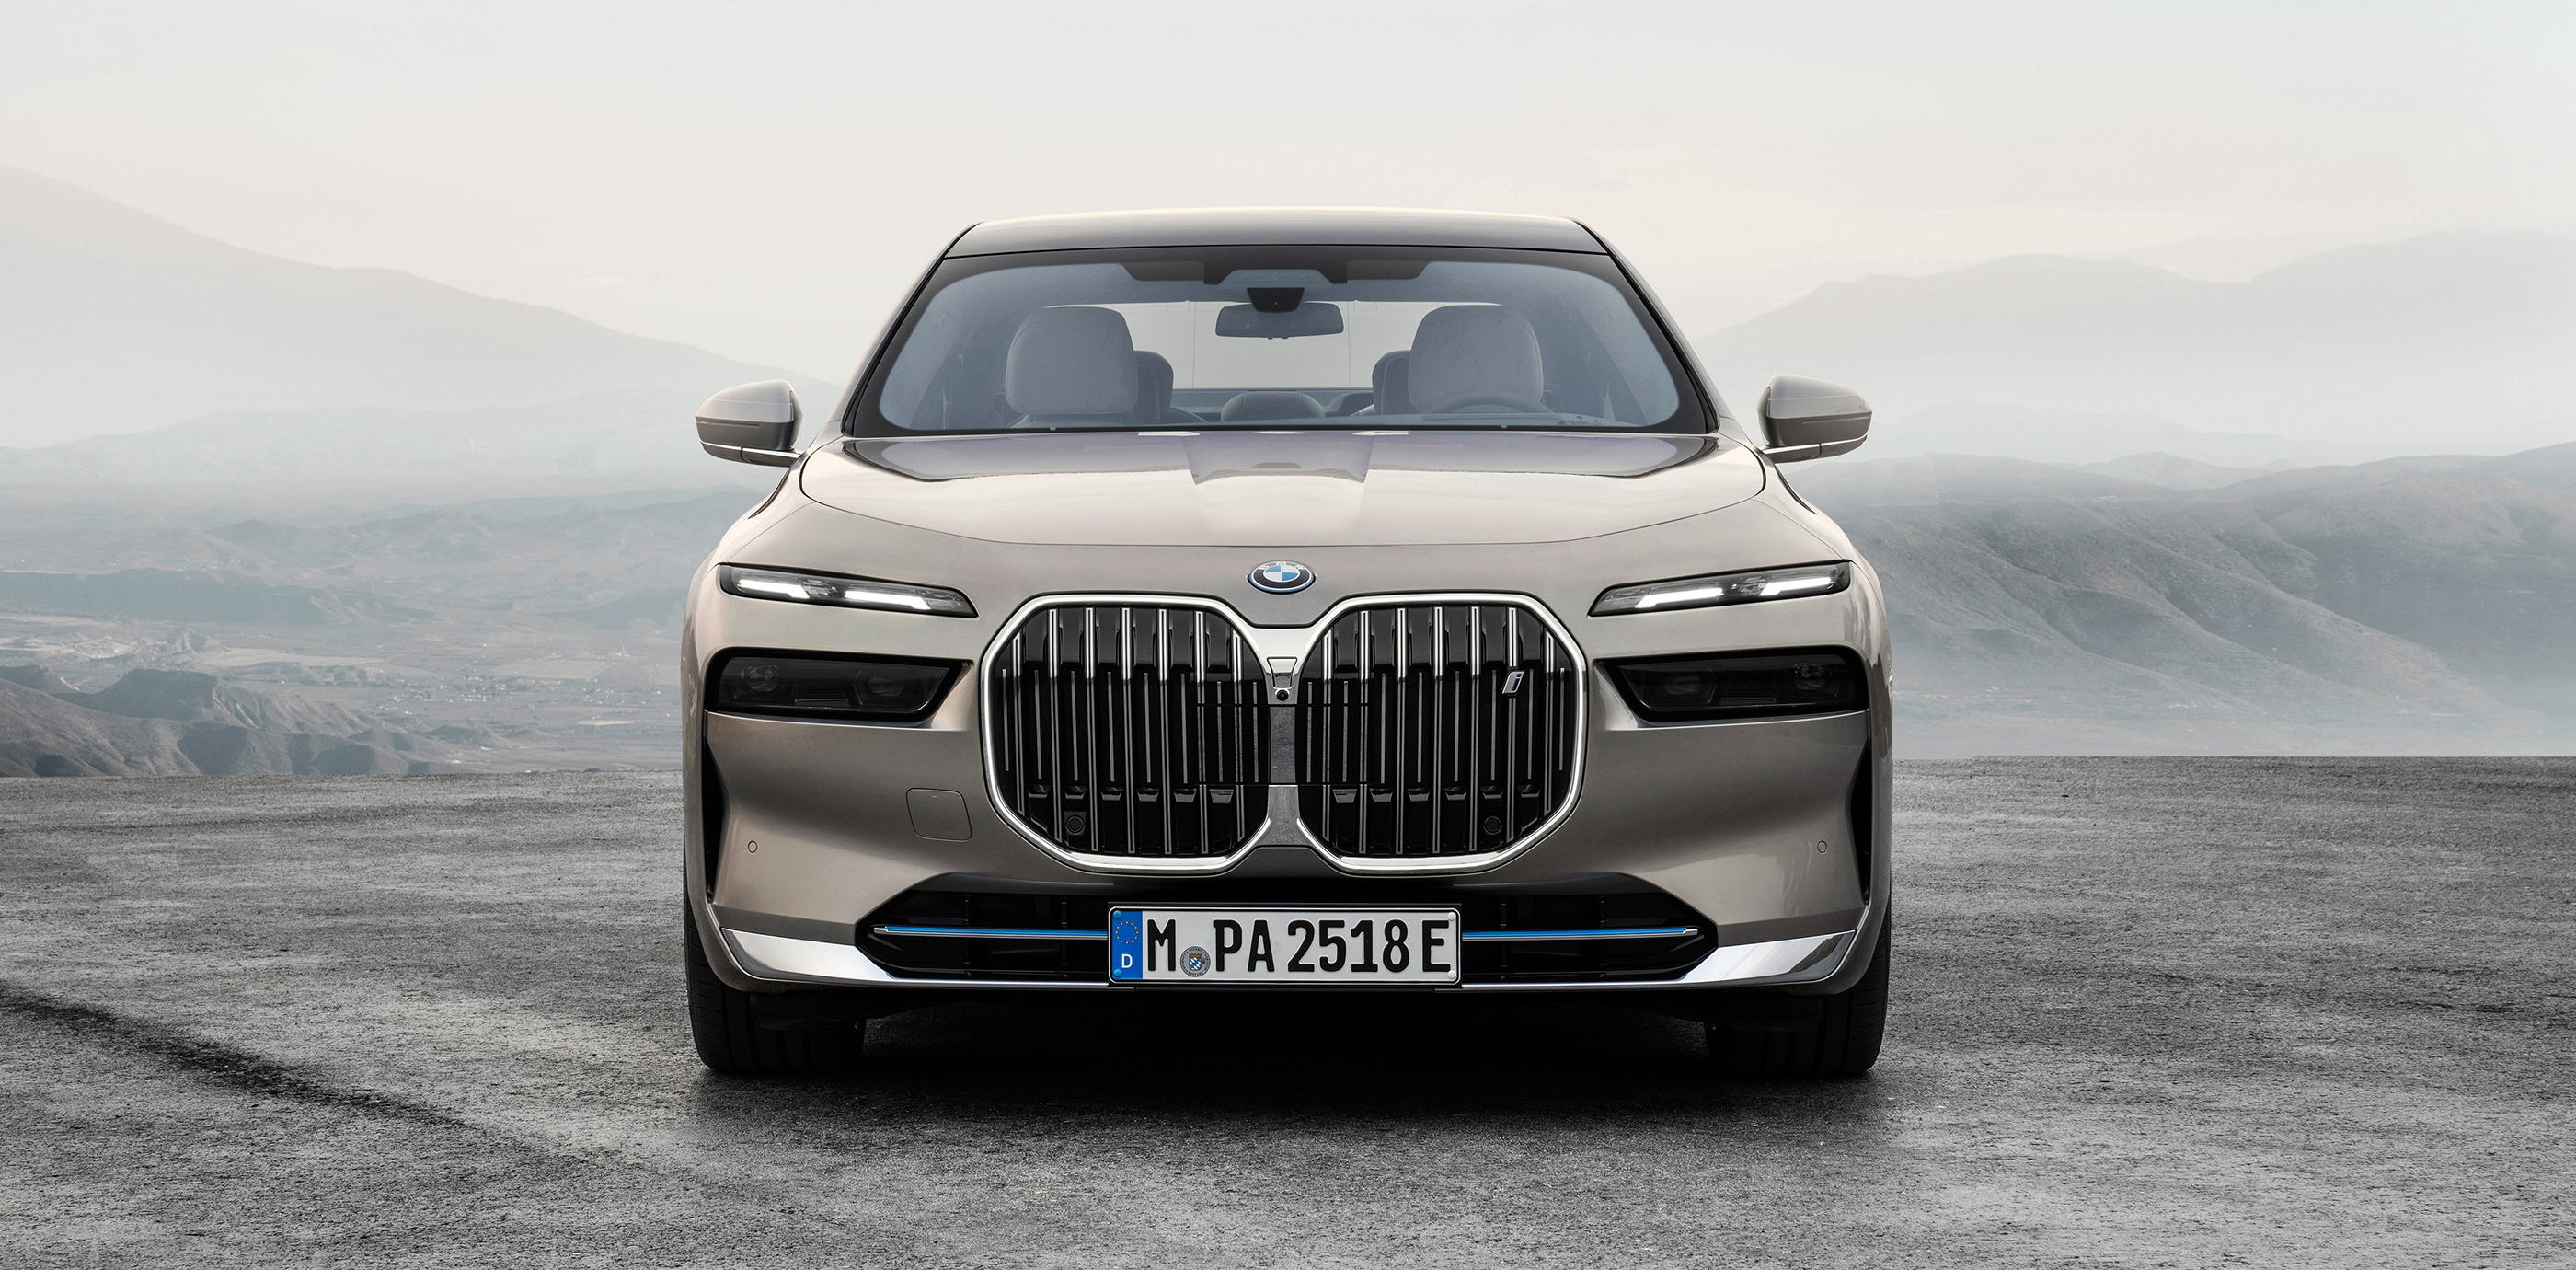 The exterior highlights of BMW electric car i7 xDrive60